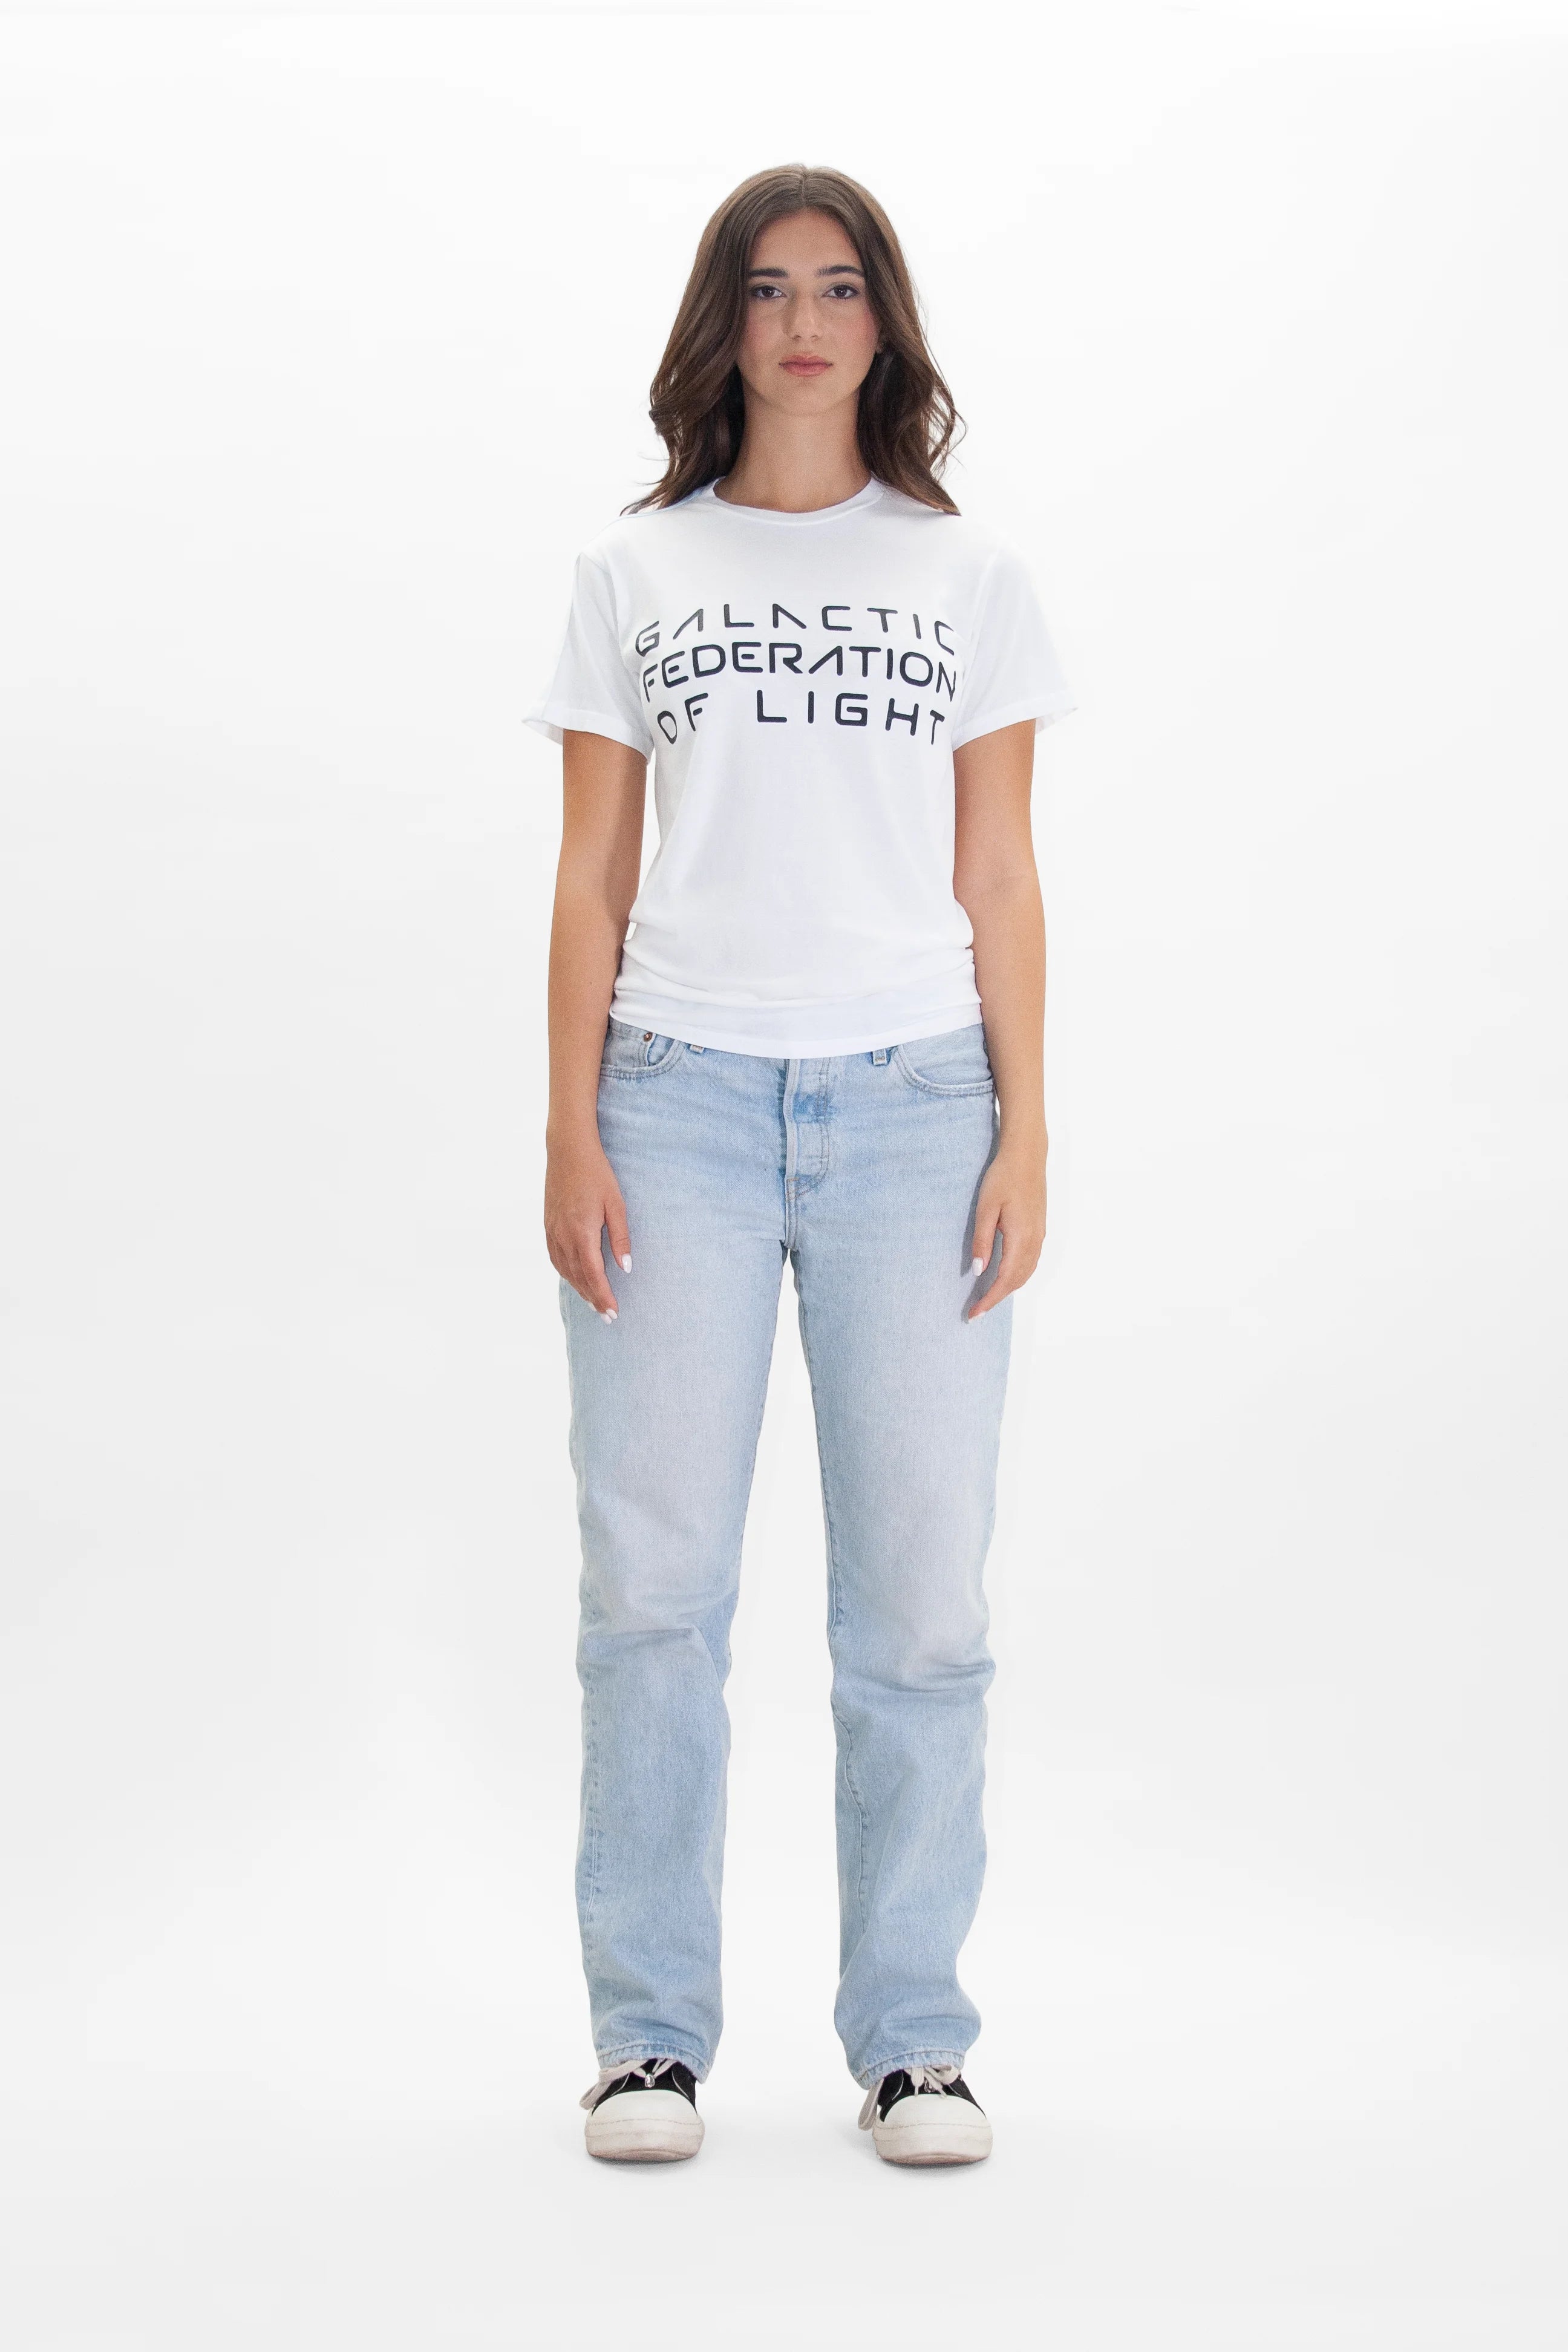 A woman wearing a GFL STACK TEE IN LITE BEAM t-shirt and jeans from the brand GFLApparel.